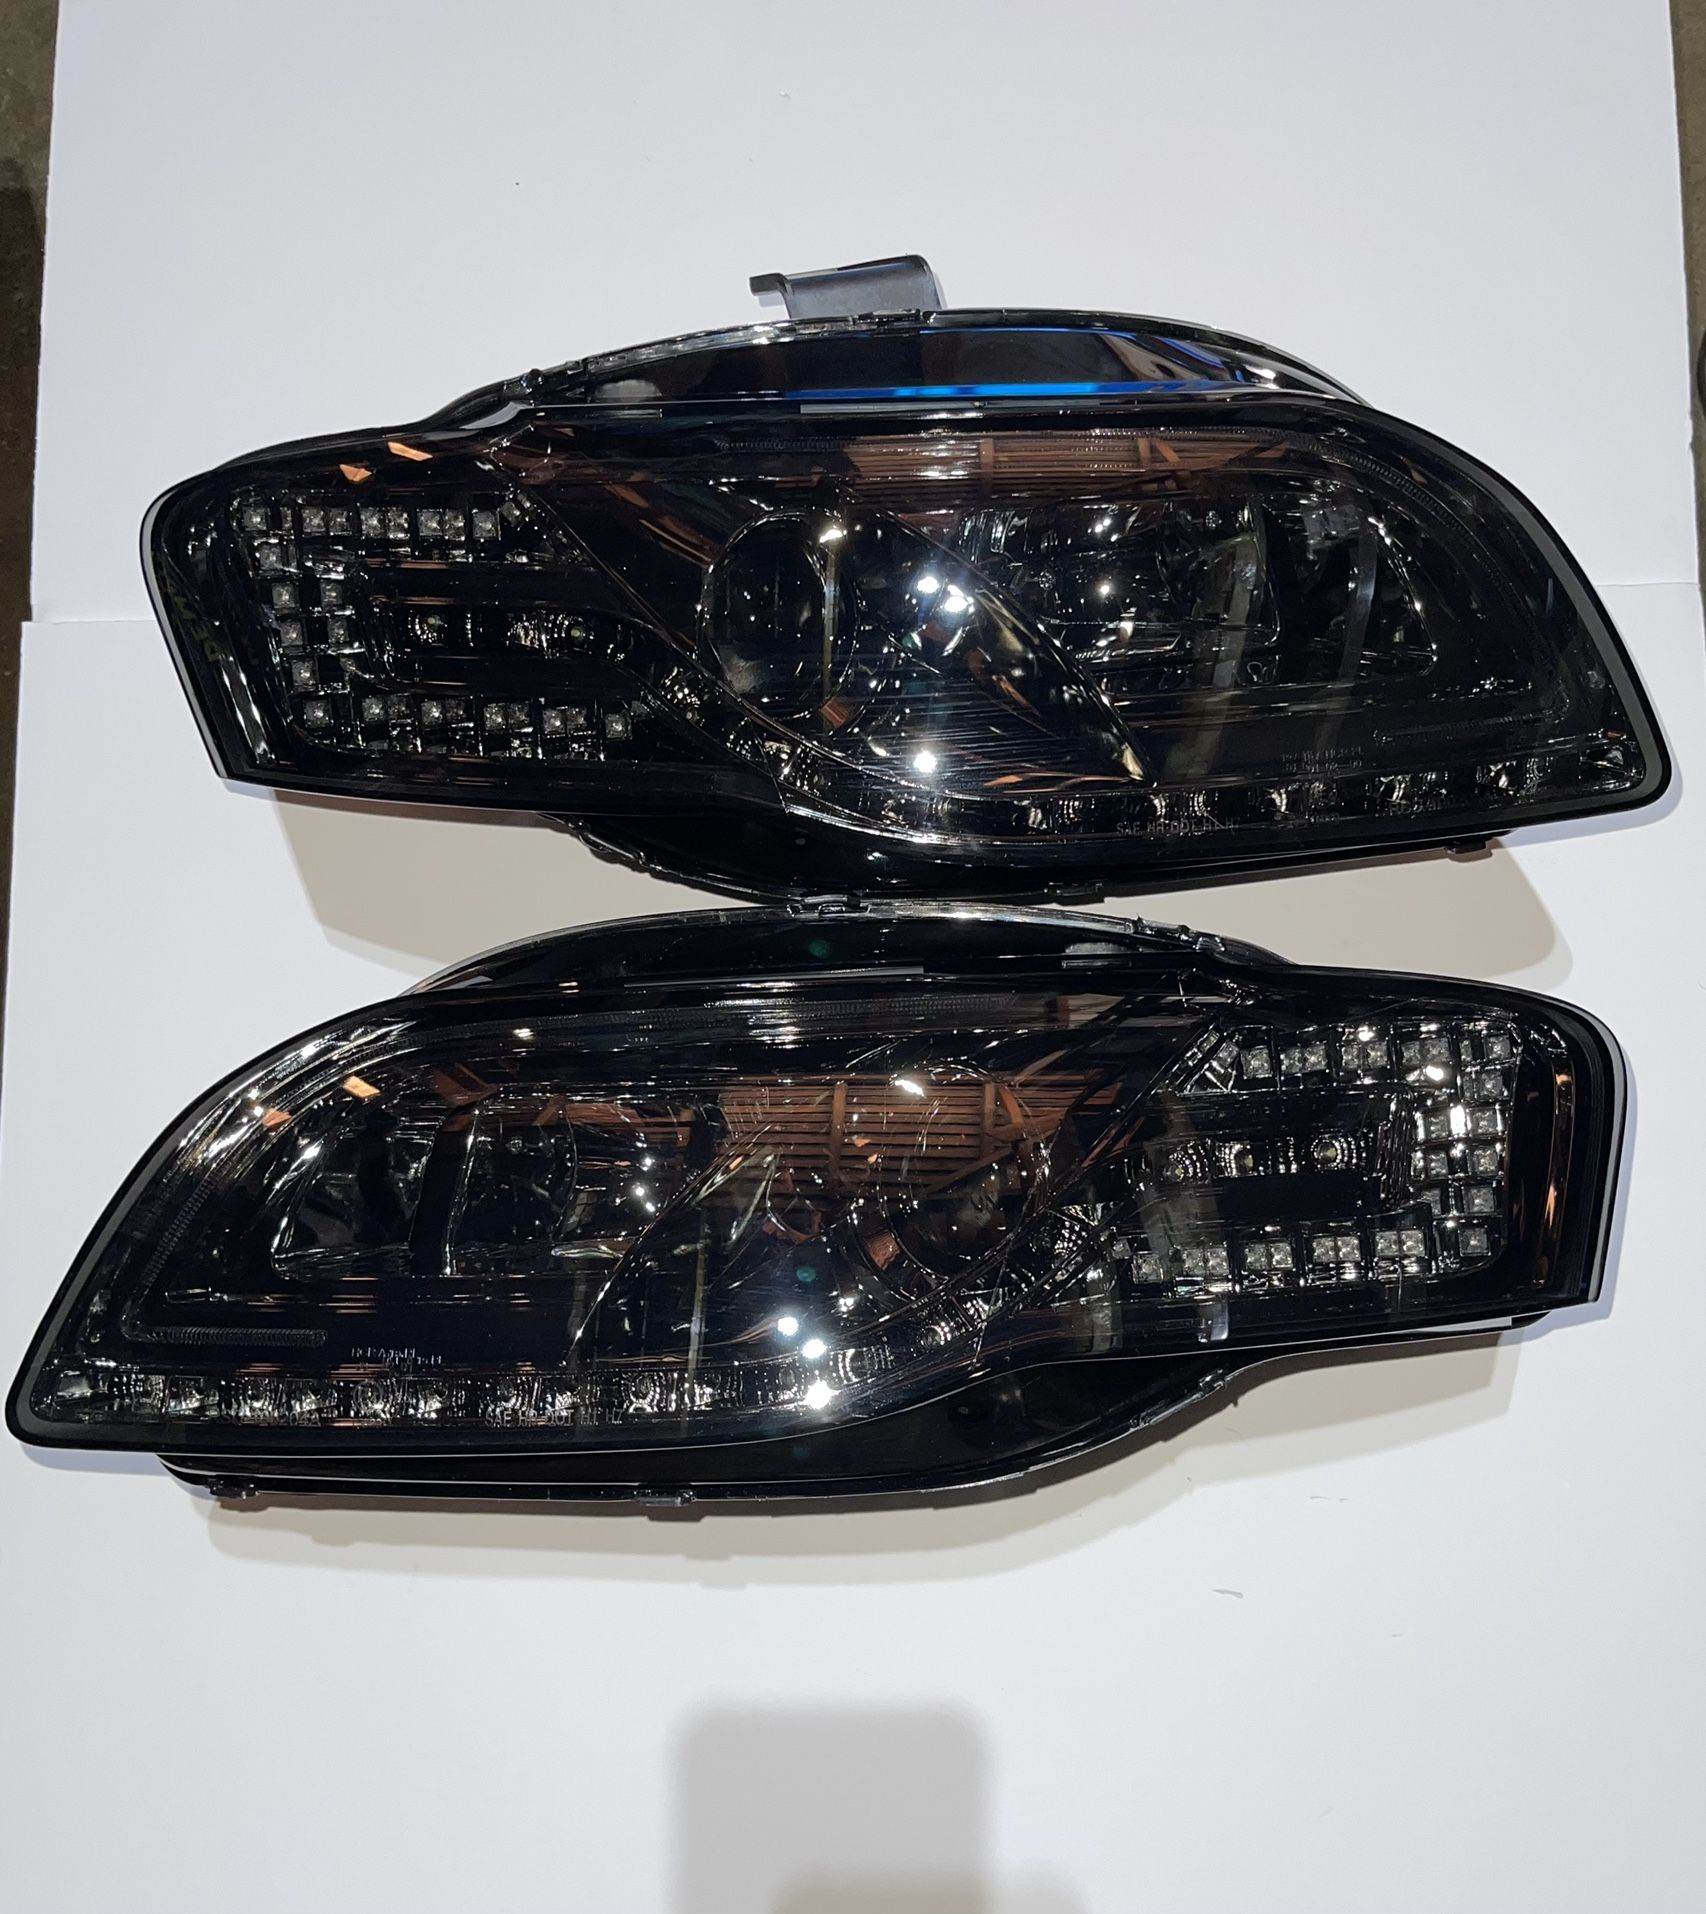 Audi A4/S4 B7 LED DRL Strip Projector Smoked Headlights Turn Signal for 2005 to 2008